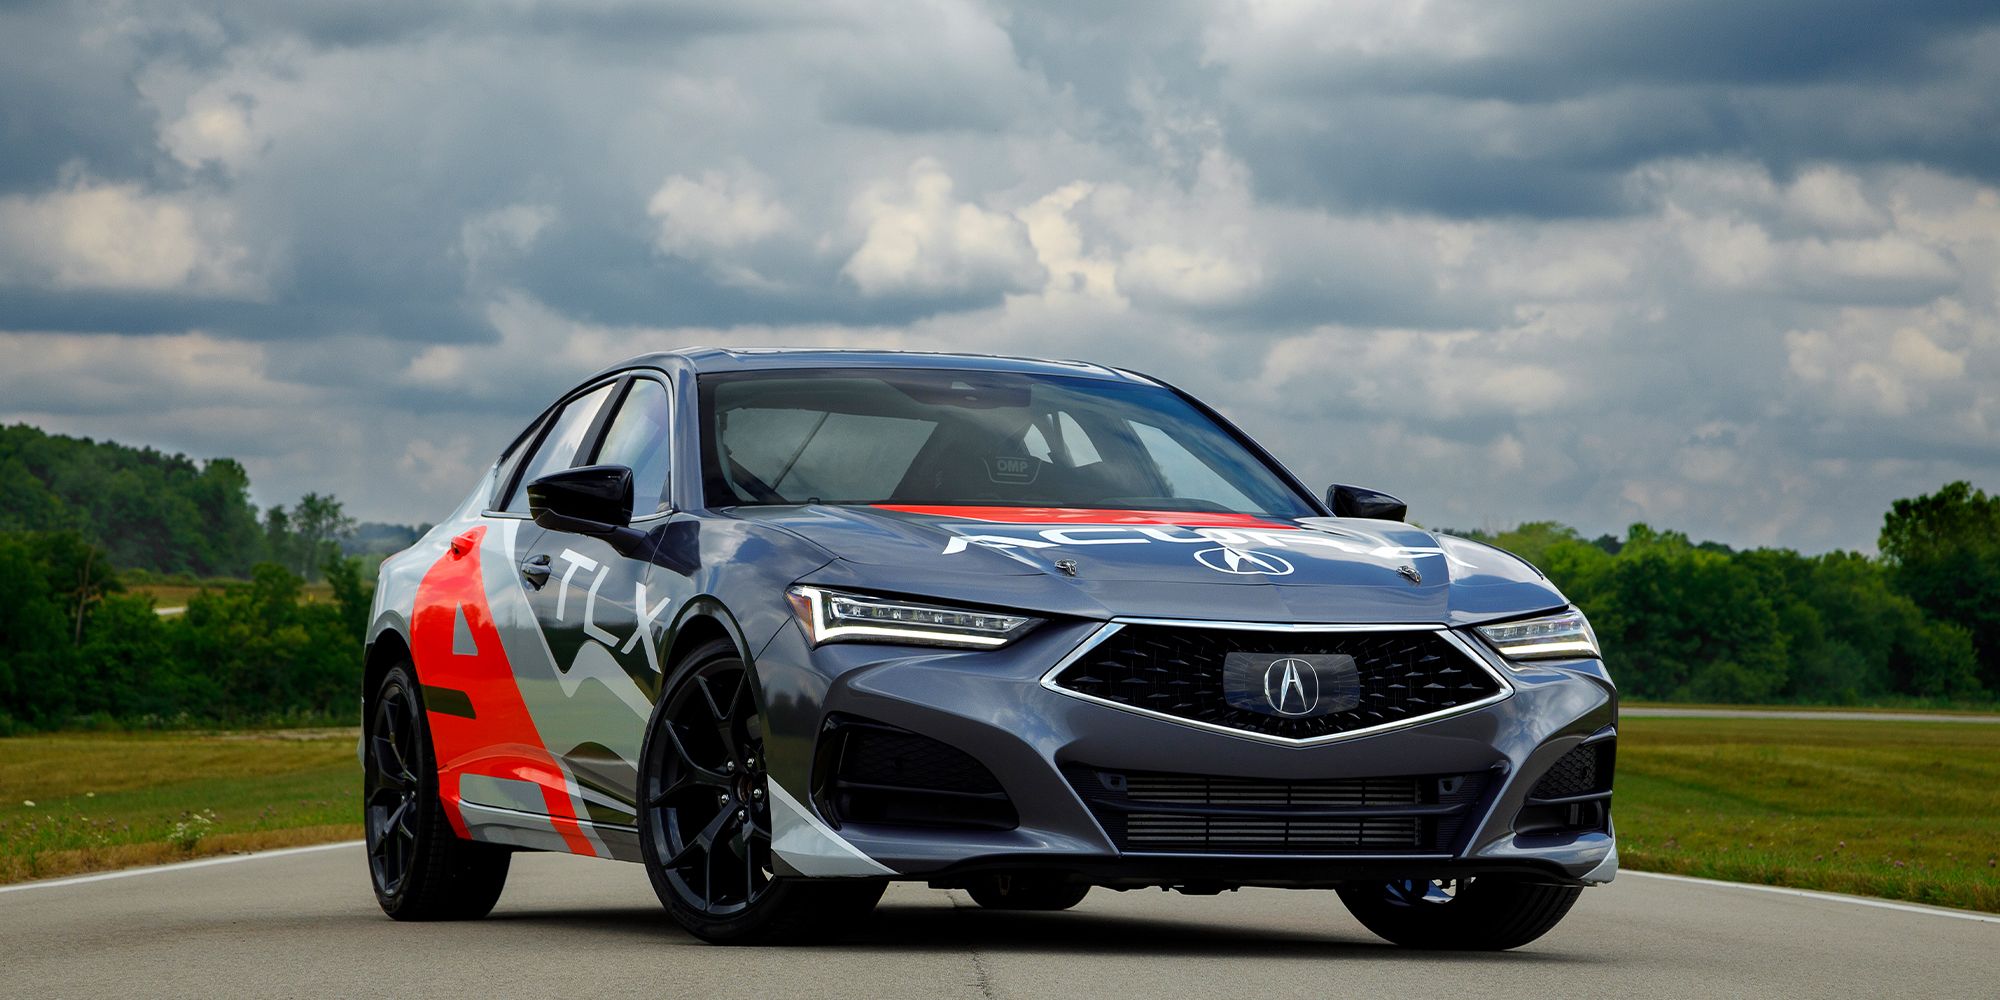 The front of the TLX's race version